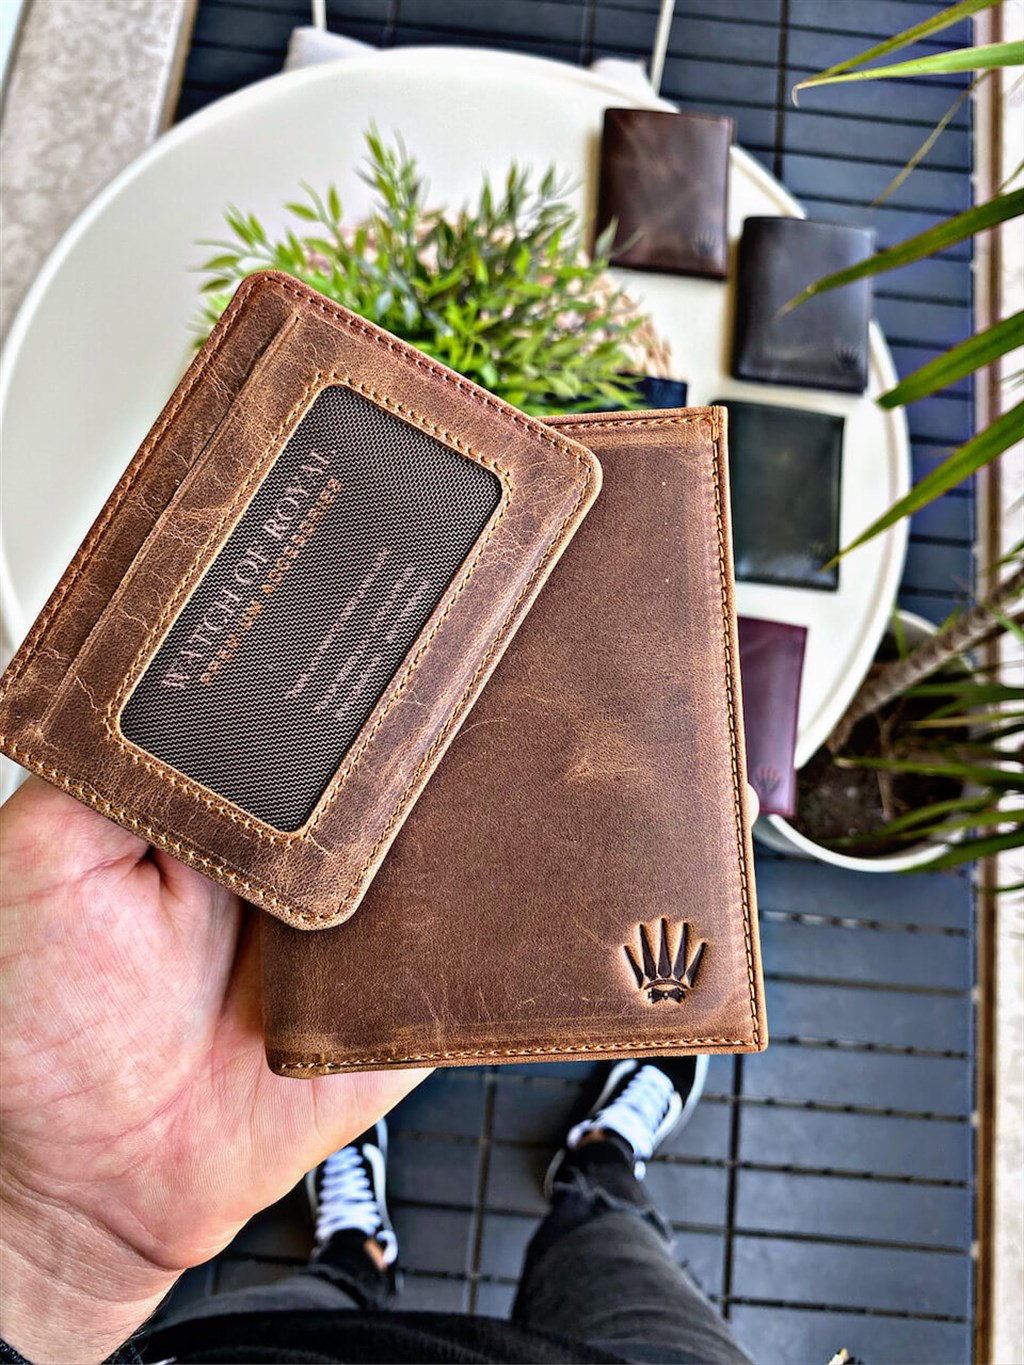 100% Genuine Leather Wallets & Card Holders - Watchofroyal.com